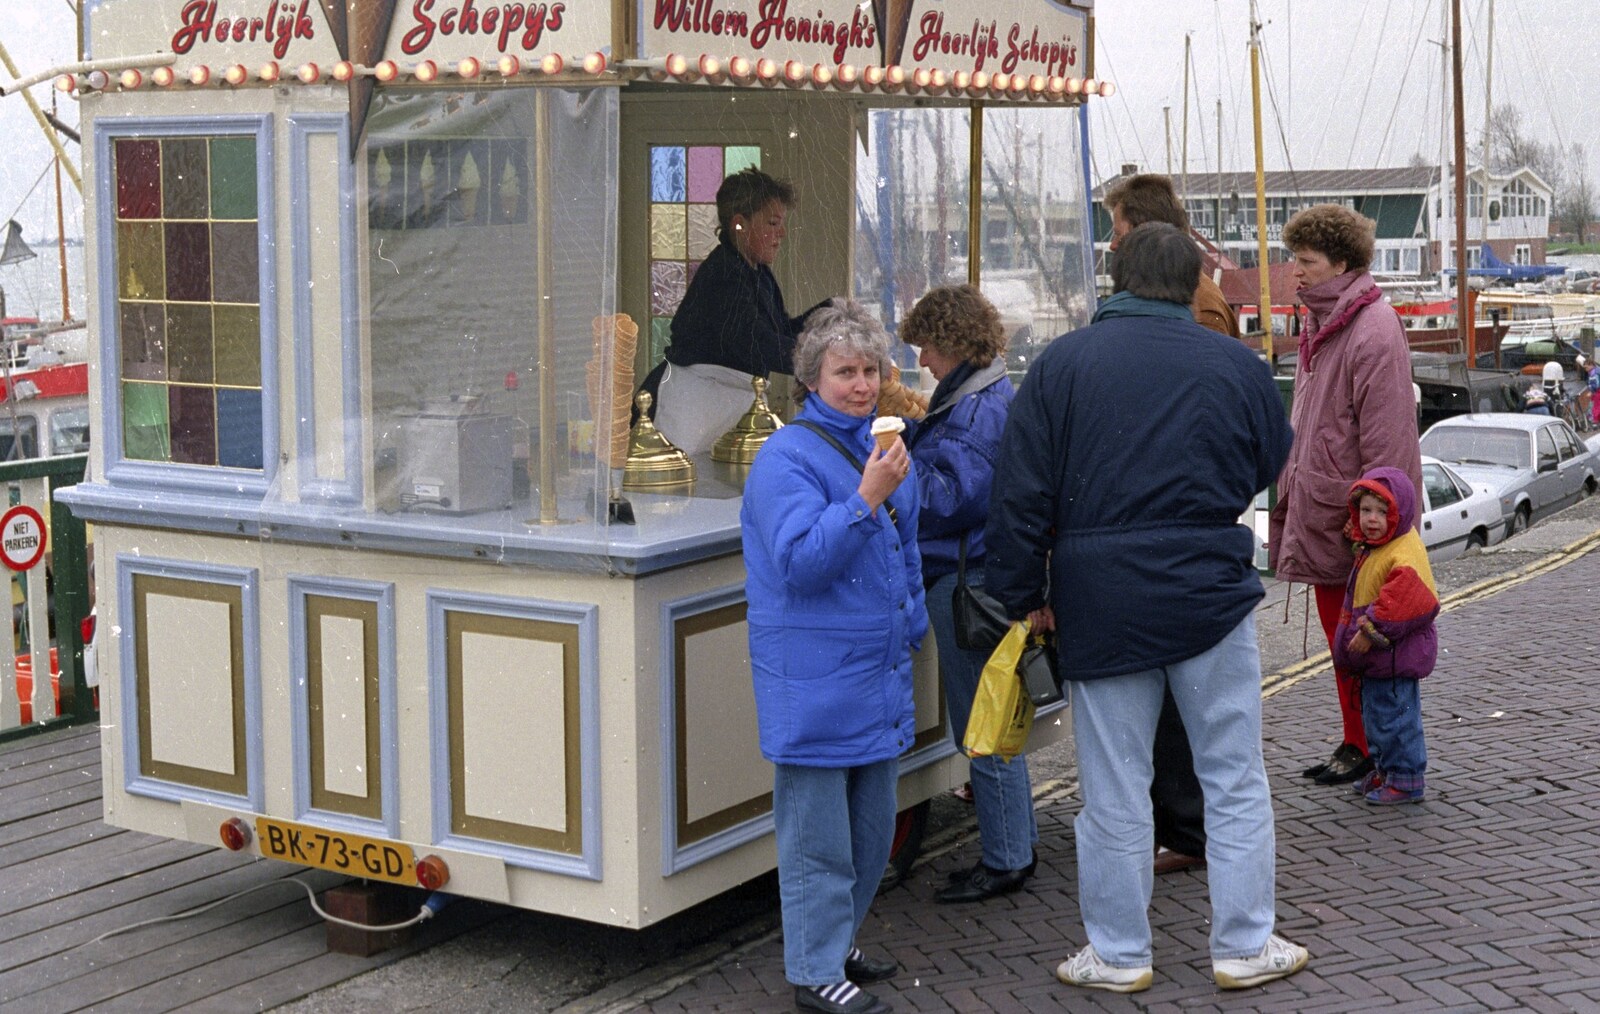 Out and About in Amsterdam, Hoorne, Vollendam and Edam, The Netherlands - 26th March 1992: Getting ice-creams in Vollendam